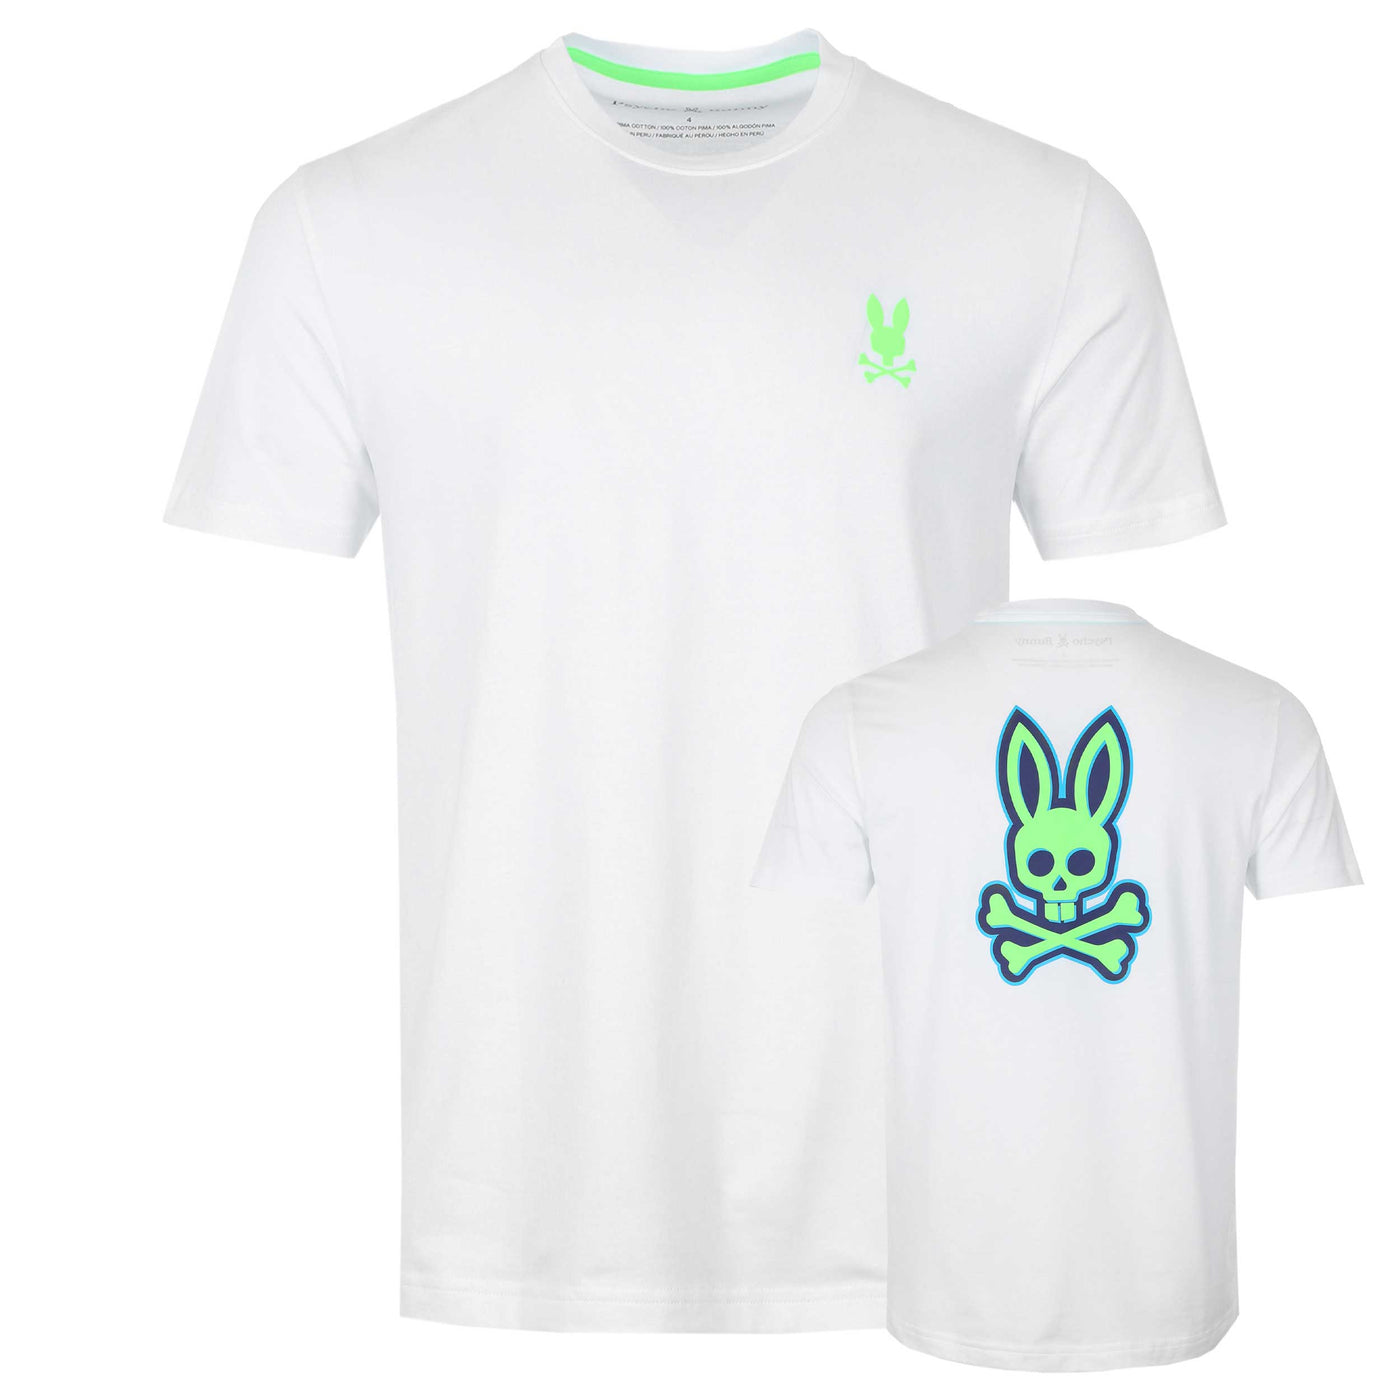 Psycho Bunny Sloan Back Graphic T Shirt in White